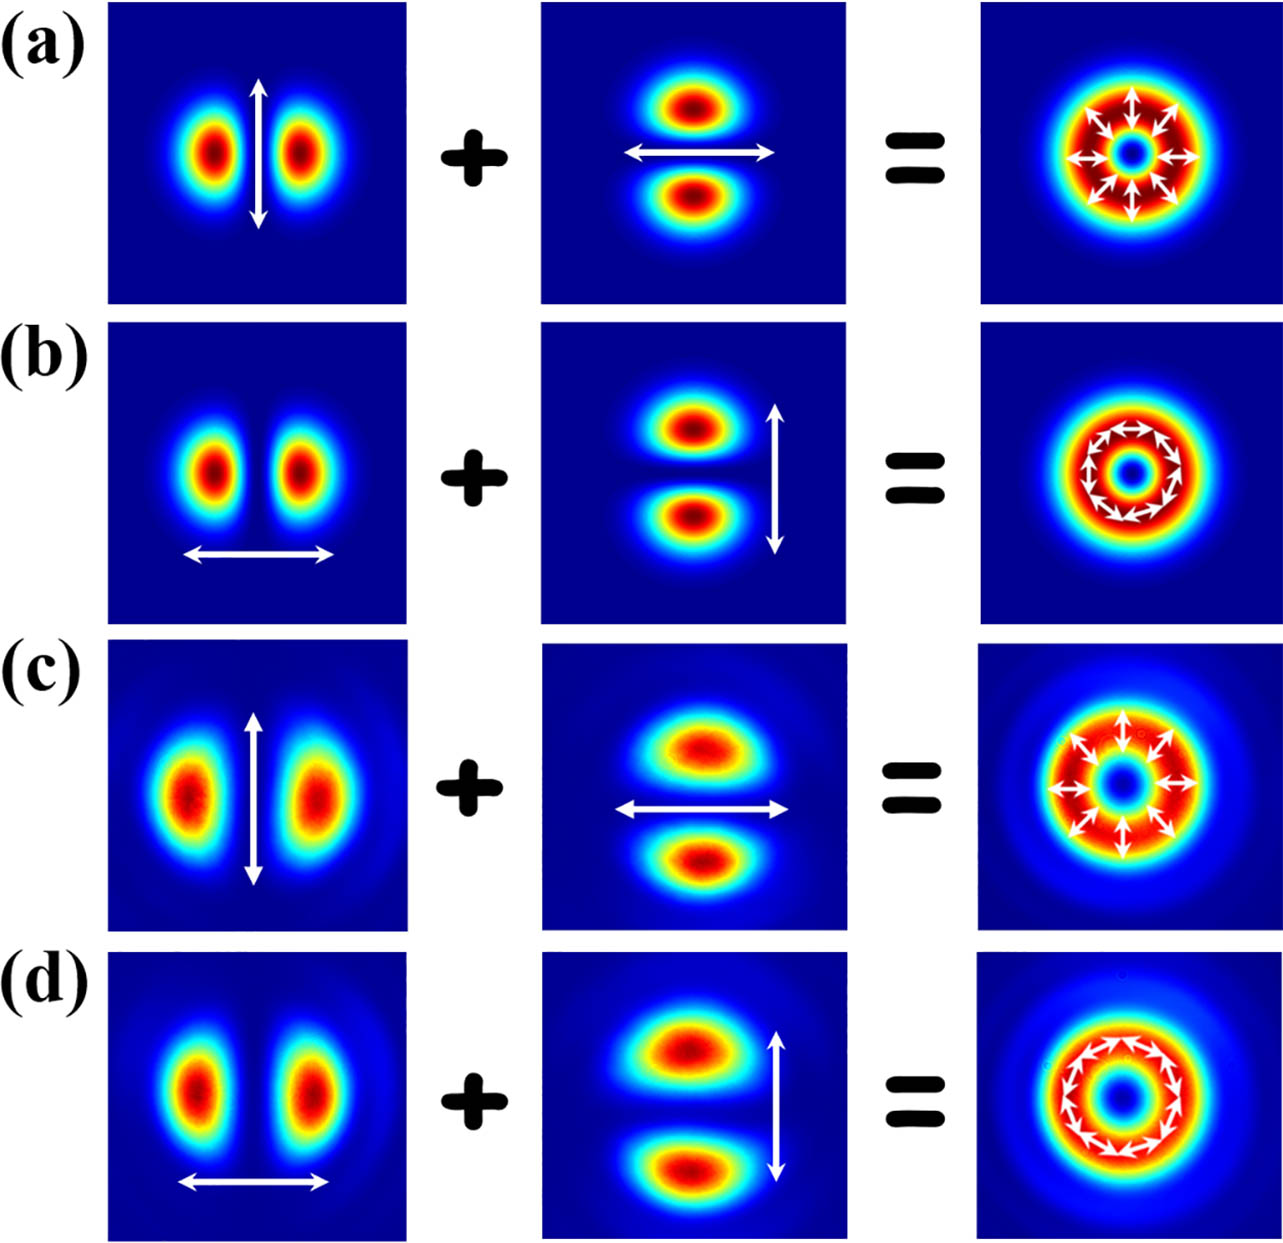 (a) and (b) are the calculated intensity distribution for the formation of radial and azimuthal vector beams using linear superposition of orthogonally polarized HG modes. (c) and (d) are the measured intensity profiles by a CCD camera at maximum power.